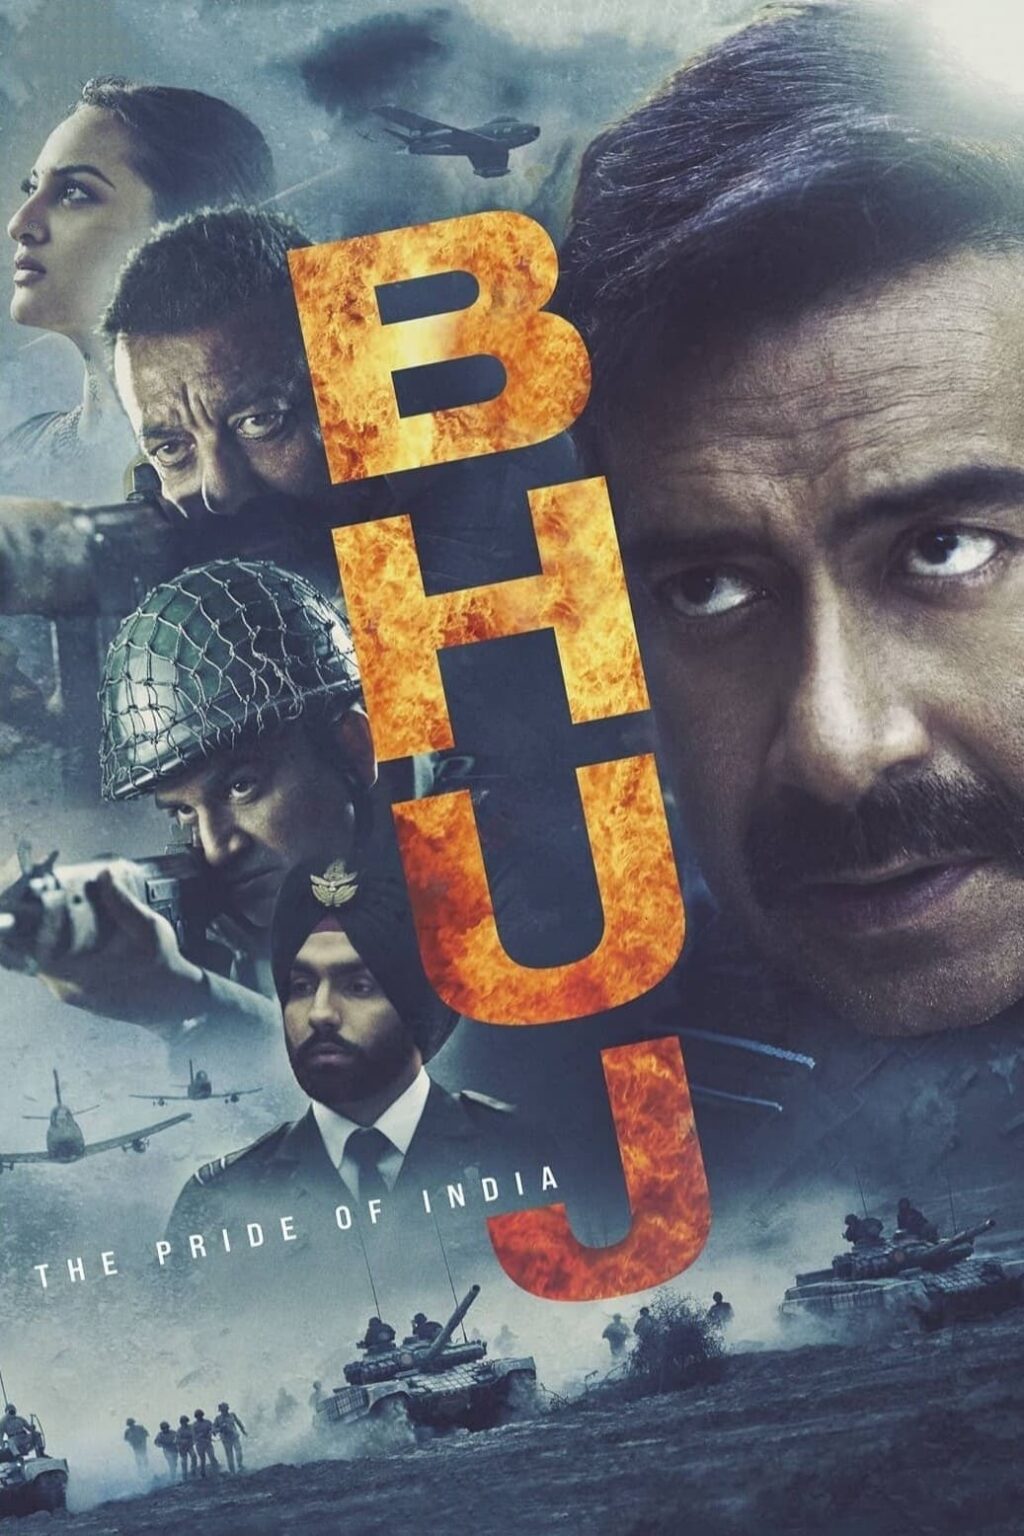 Poster for the movie "Bhuj: The Pride of India"